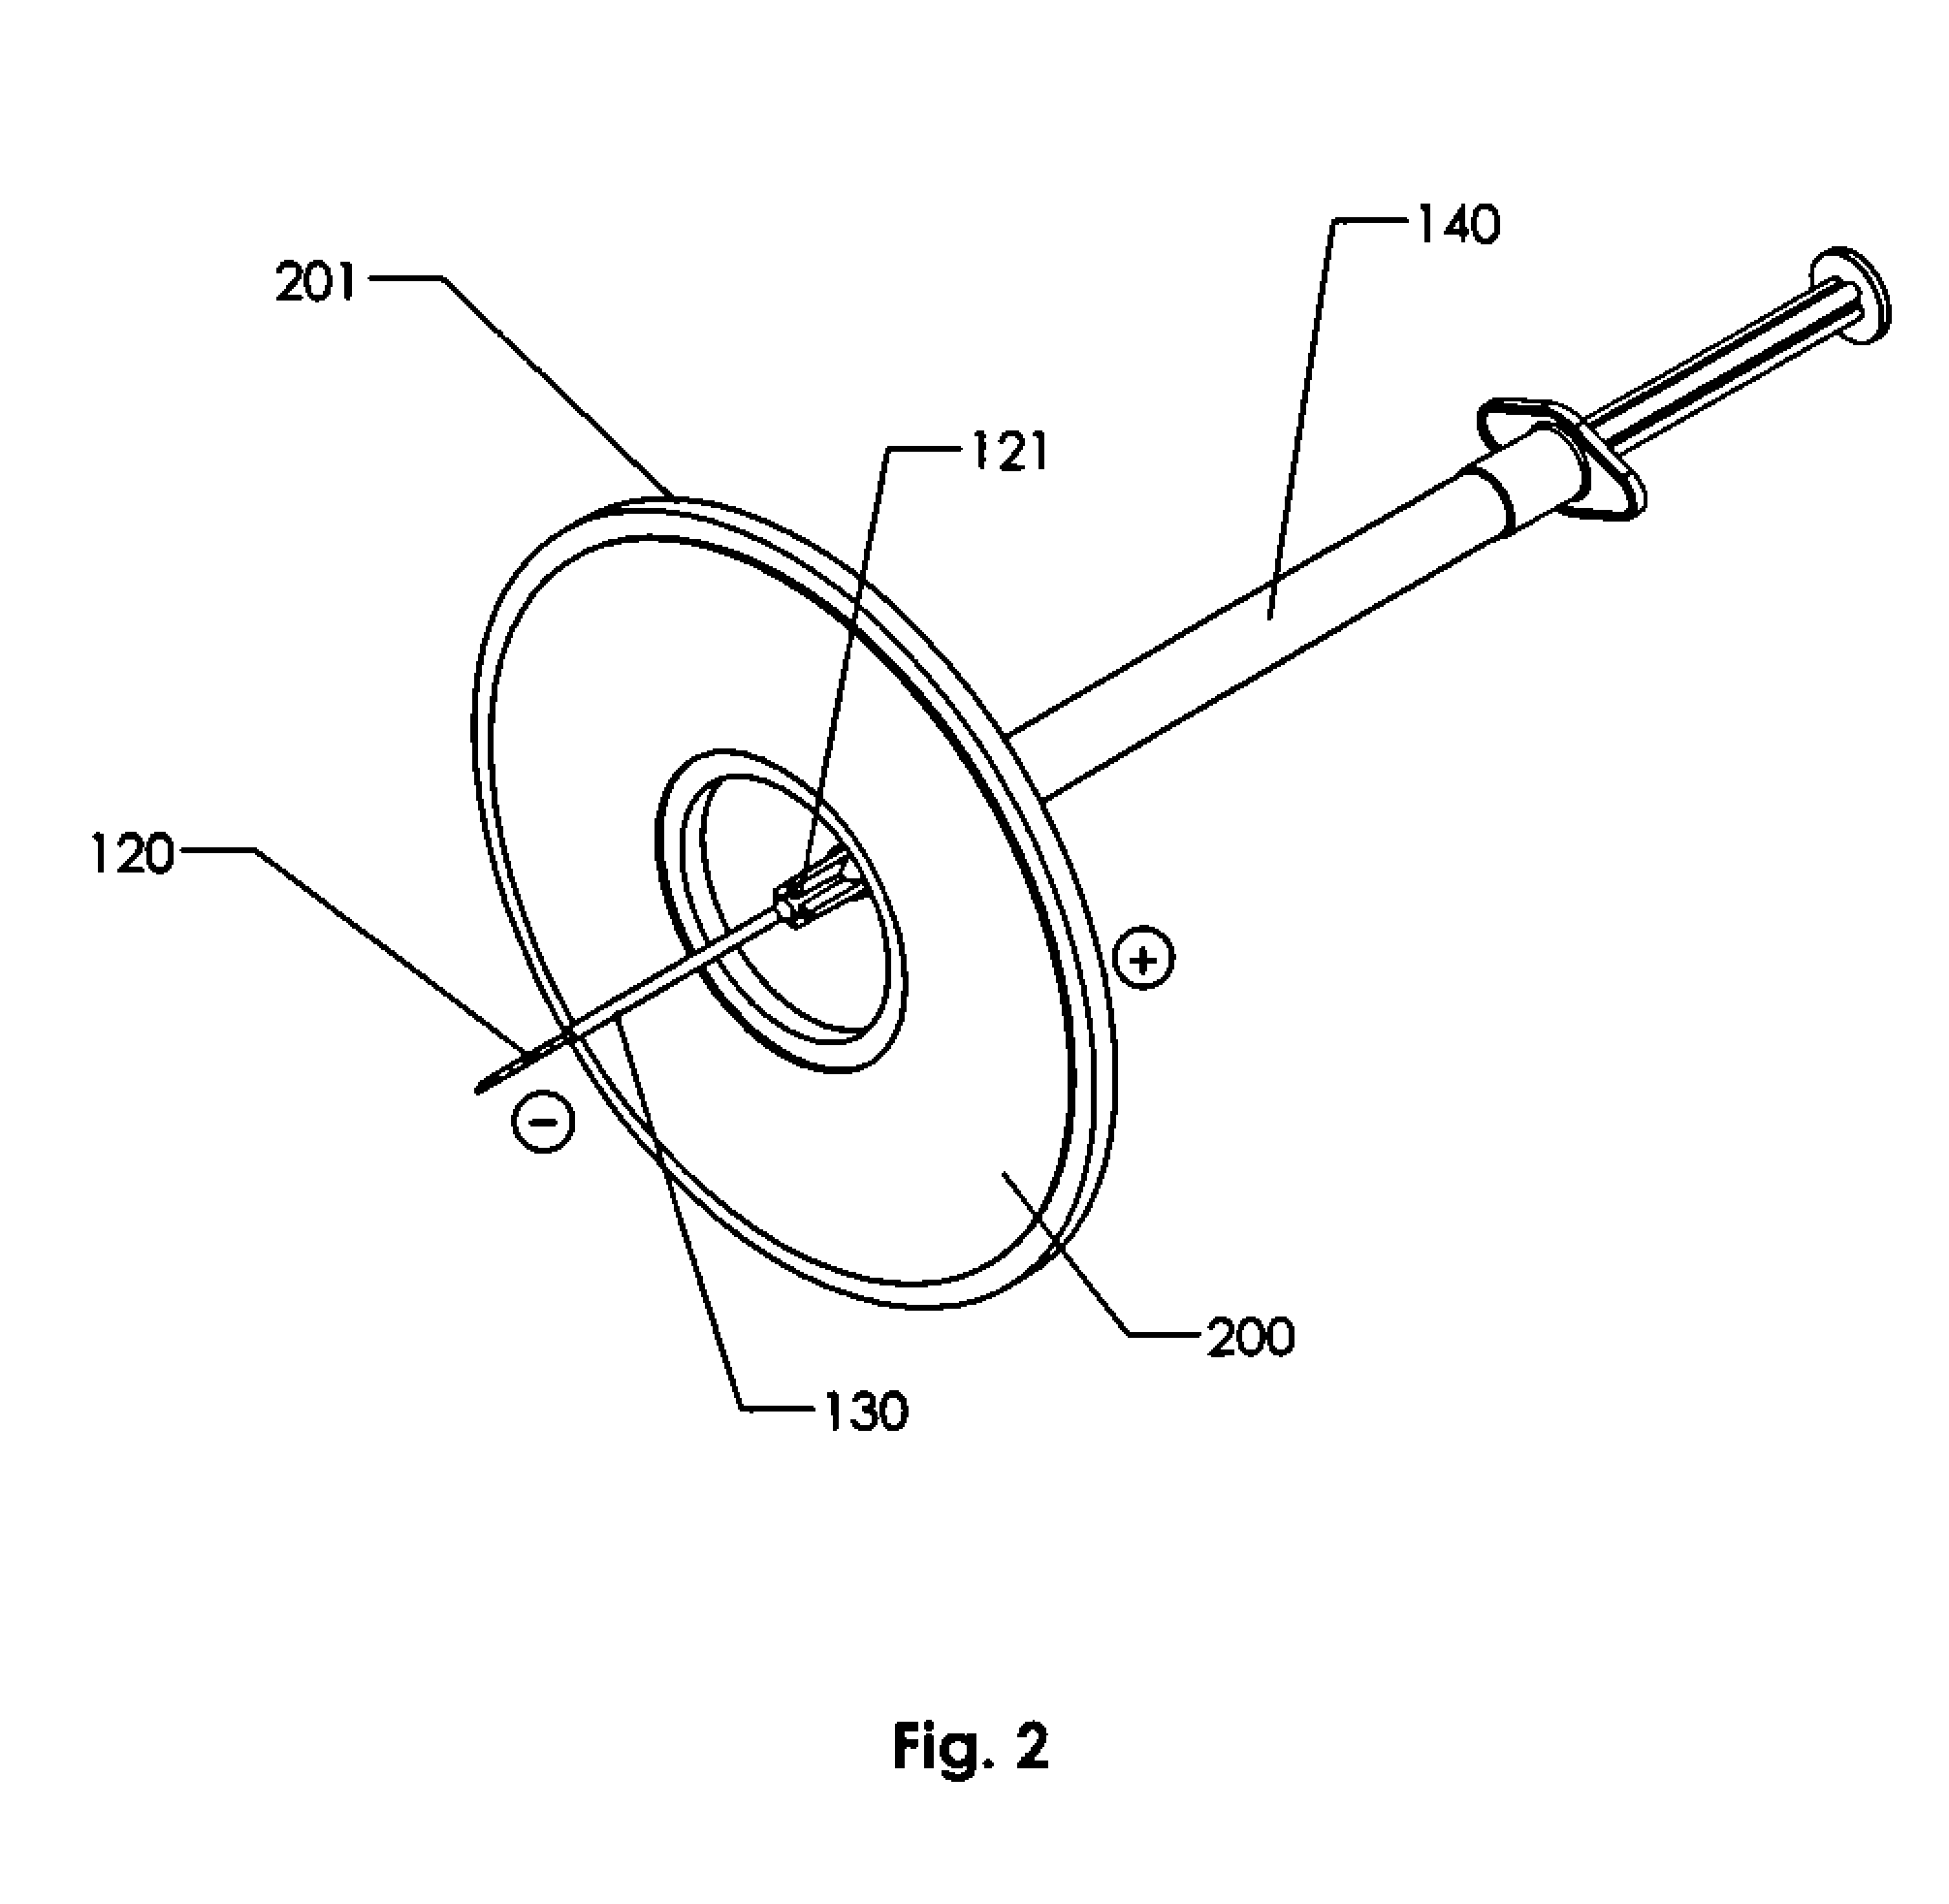 Variable current density single needle electroporation system and method